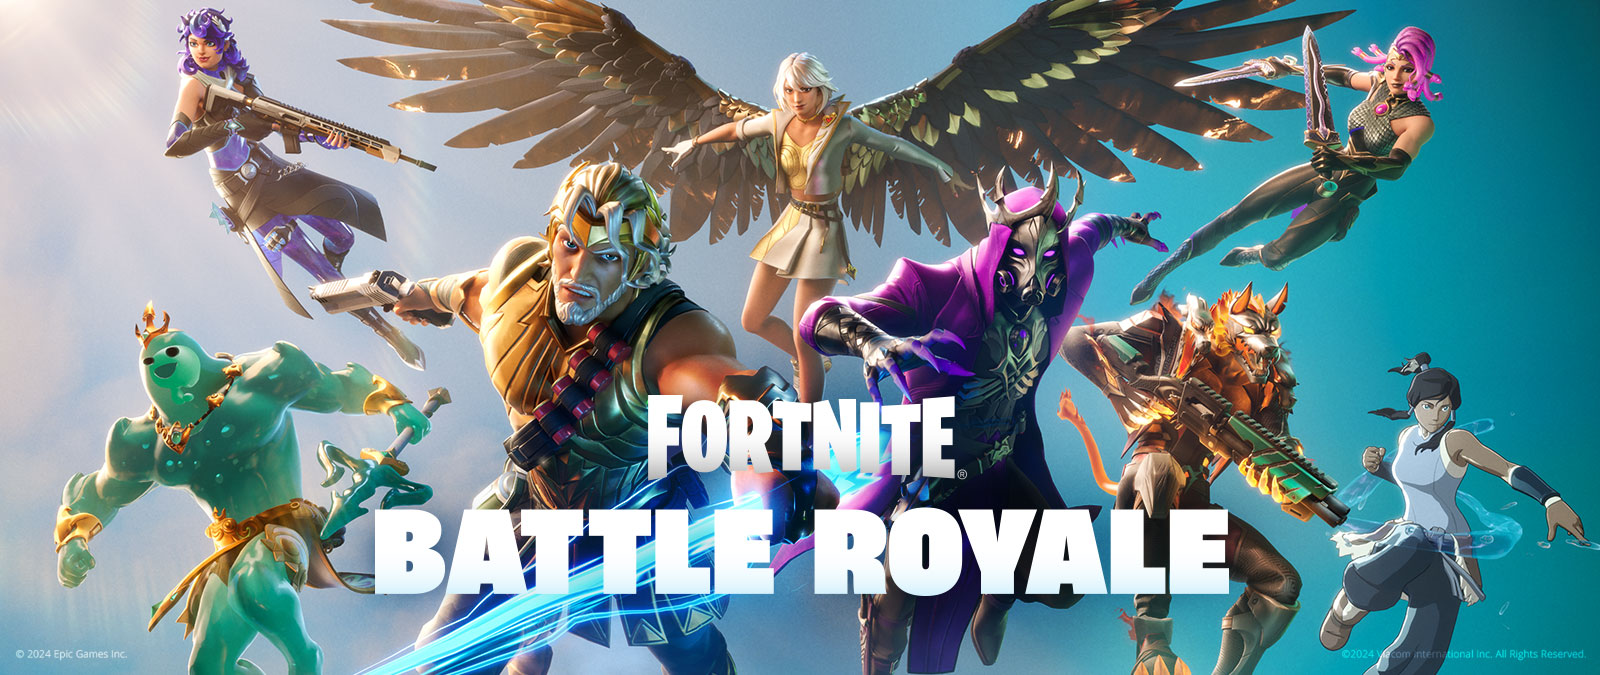 Players using the new skins and customizations from Season 2 jump toward the screen, featuring the text Fortnite Battle Royale.